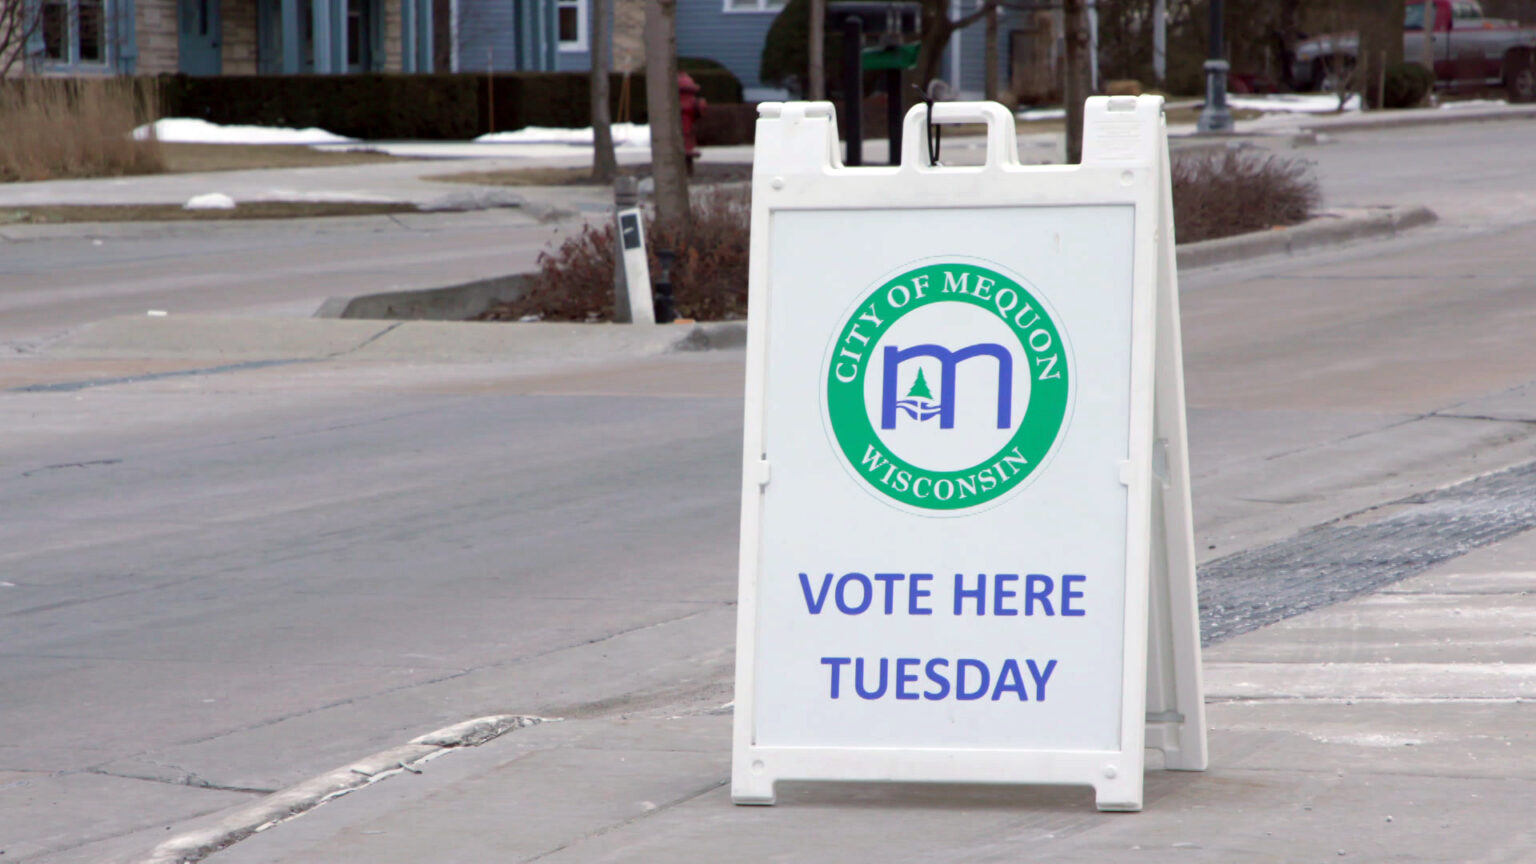 A sandwich board sign with the logo of the city of Mequon and the words Vote Here Tuesday stands on a sidewalk, with a street, trees and buildings in the background.